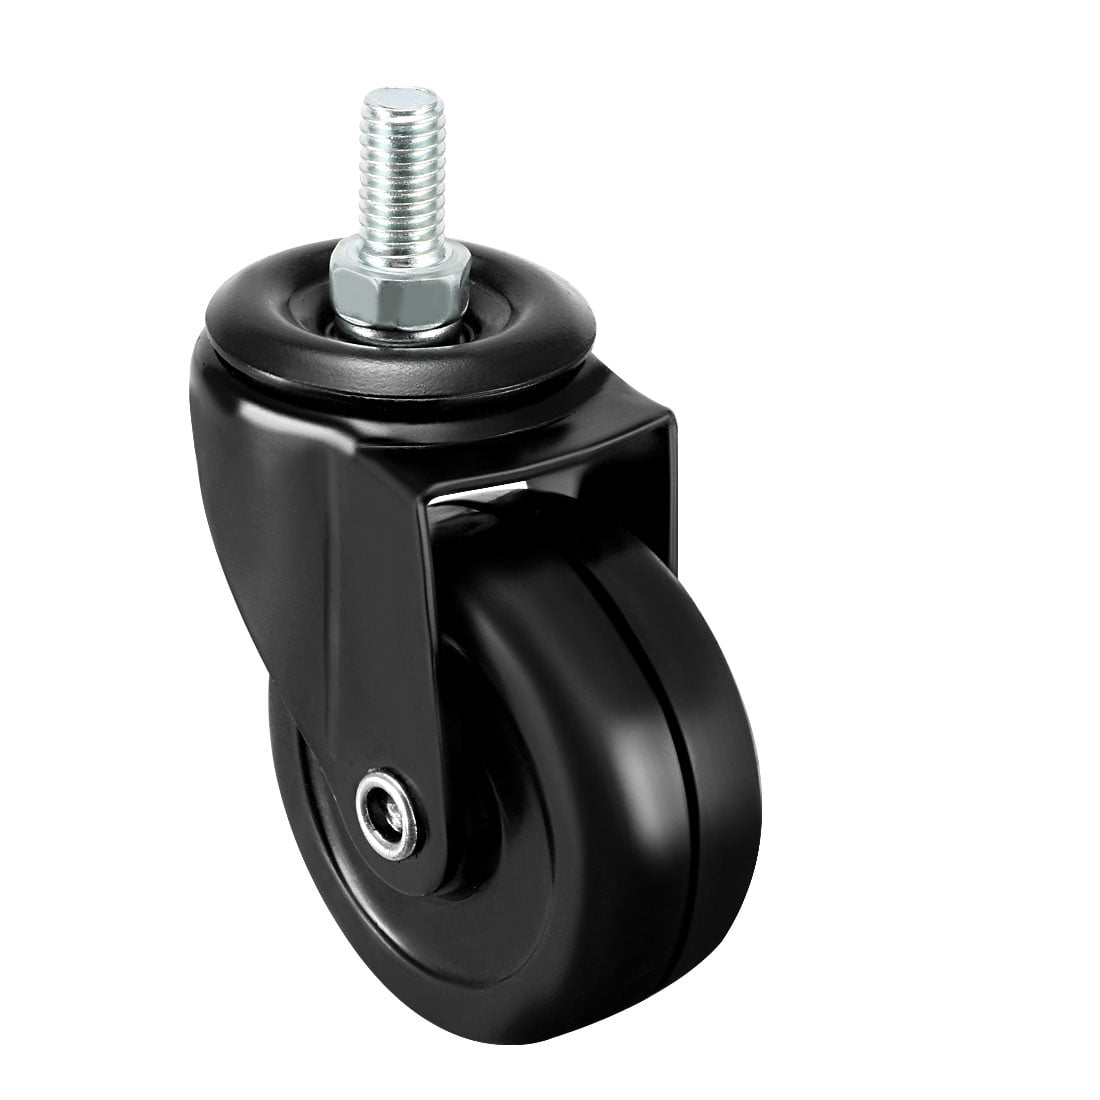 4 Pieces 2-inch Solid Rubber Swivel castors Wheels with Threaded Wheels M8 x 15 mm 360 Degrees Black Capacity 44 lb Each 